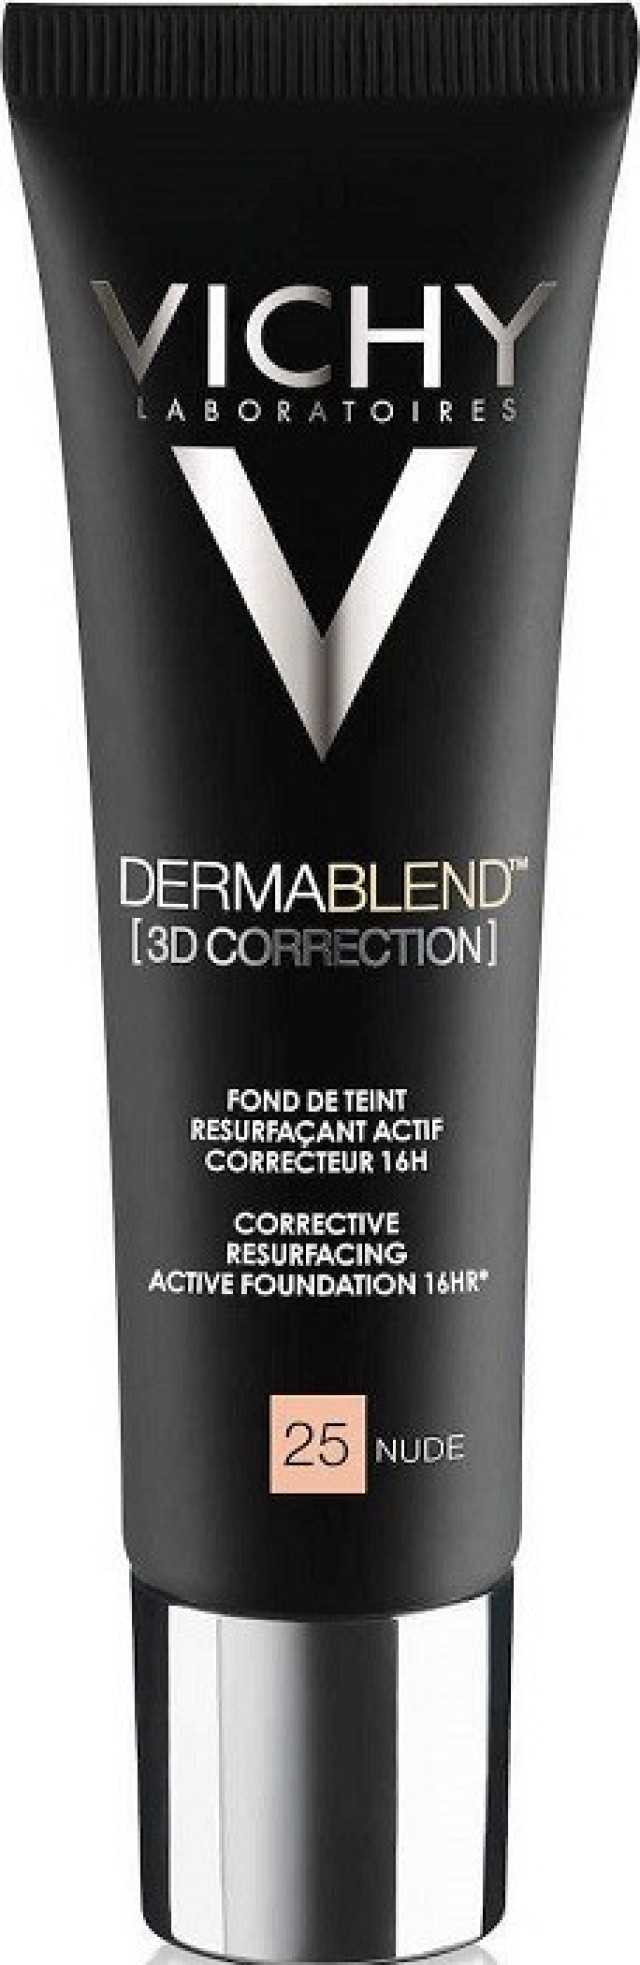 Vichy Dermablend 3D Correction SPF25 Καλυπτικό Make up 25 Nude 30ml